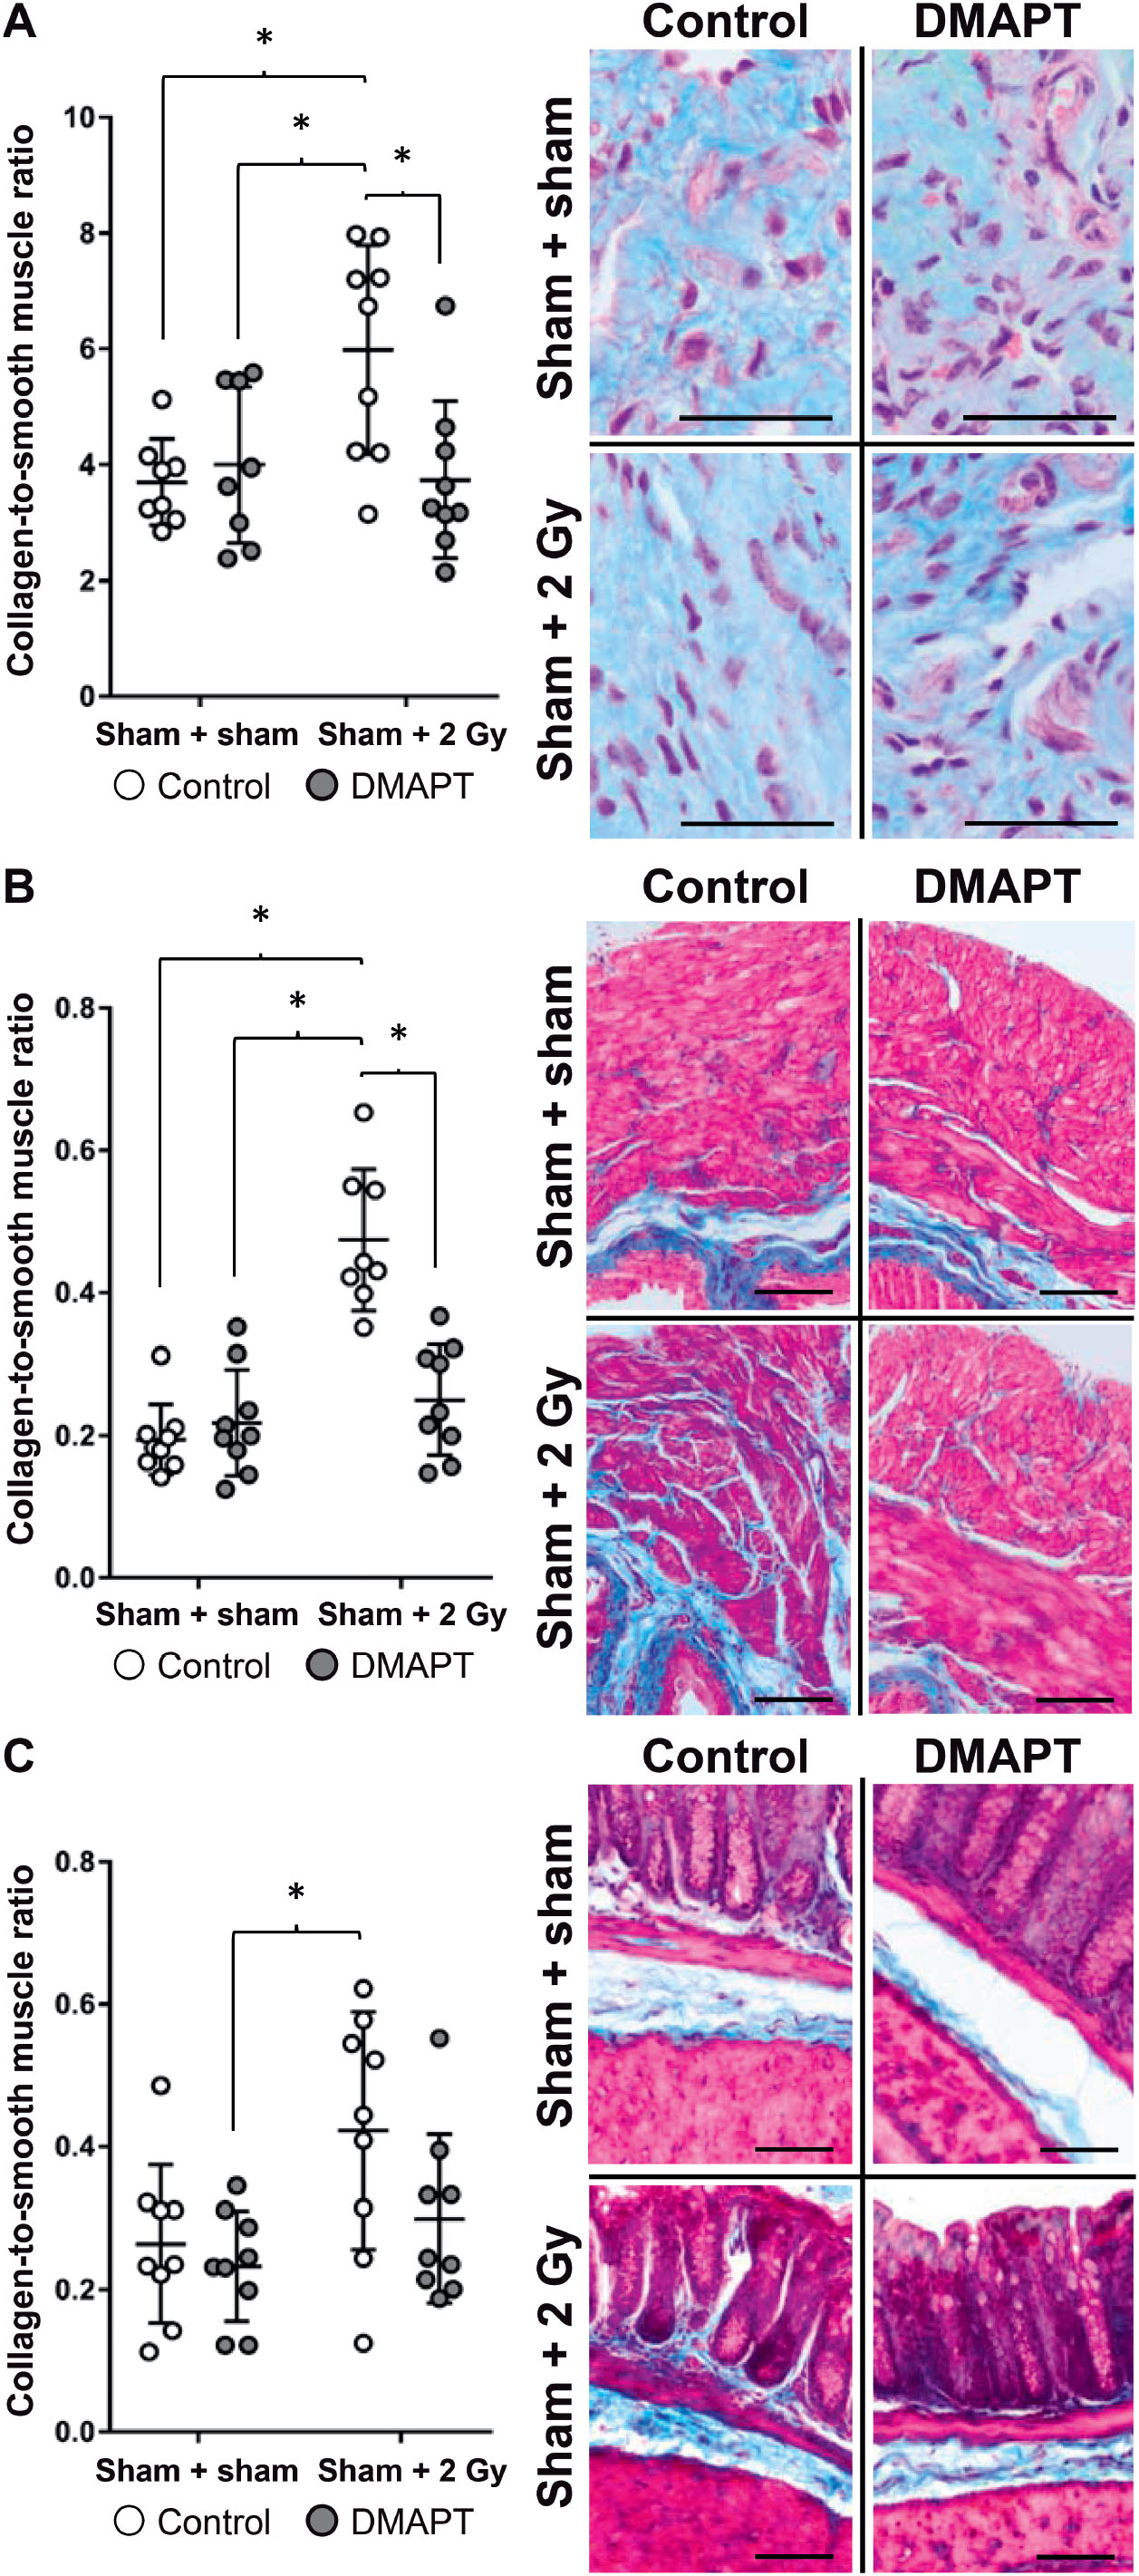 Dmapt Is An Effective Radioprotector From Long Term Radiation Induced Damage To Normal Mouse Tissues In Vivo